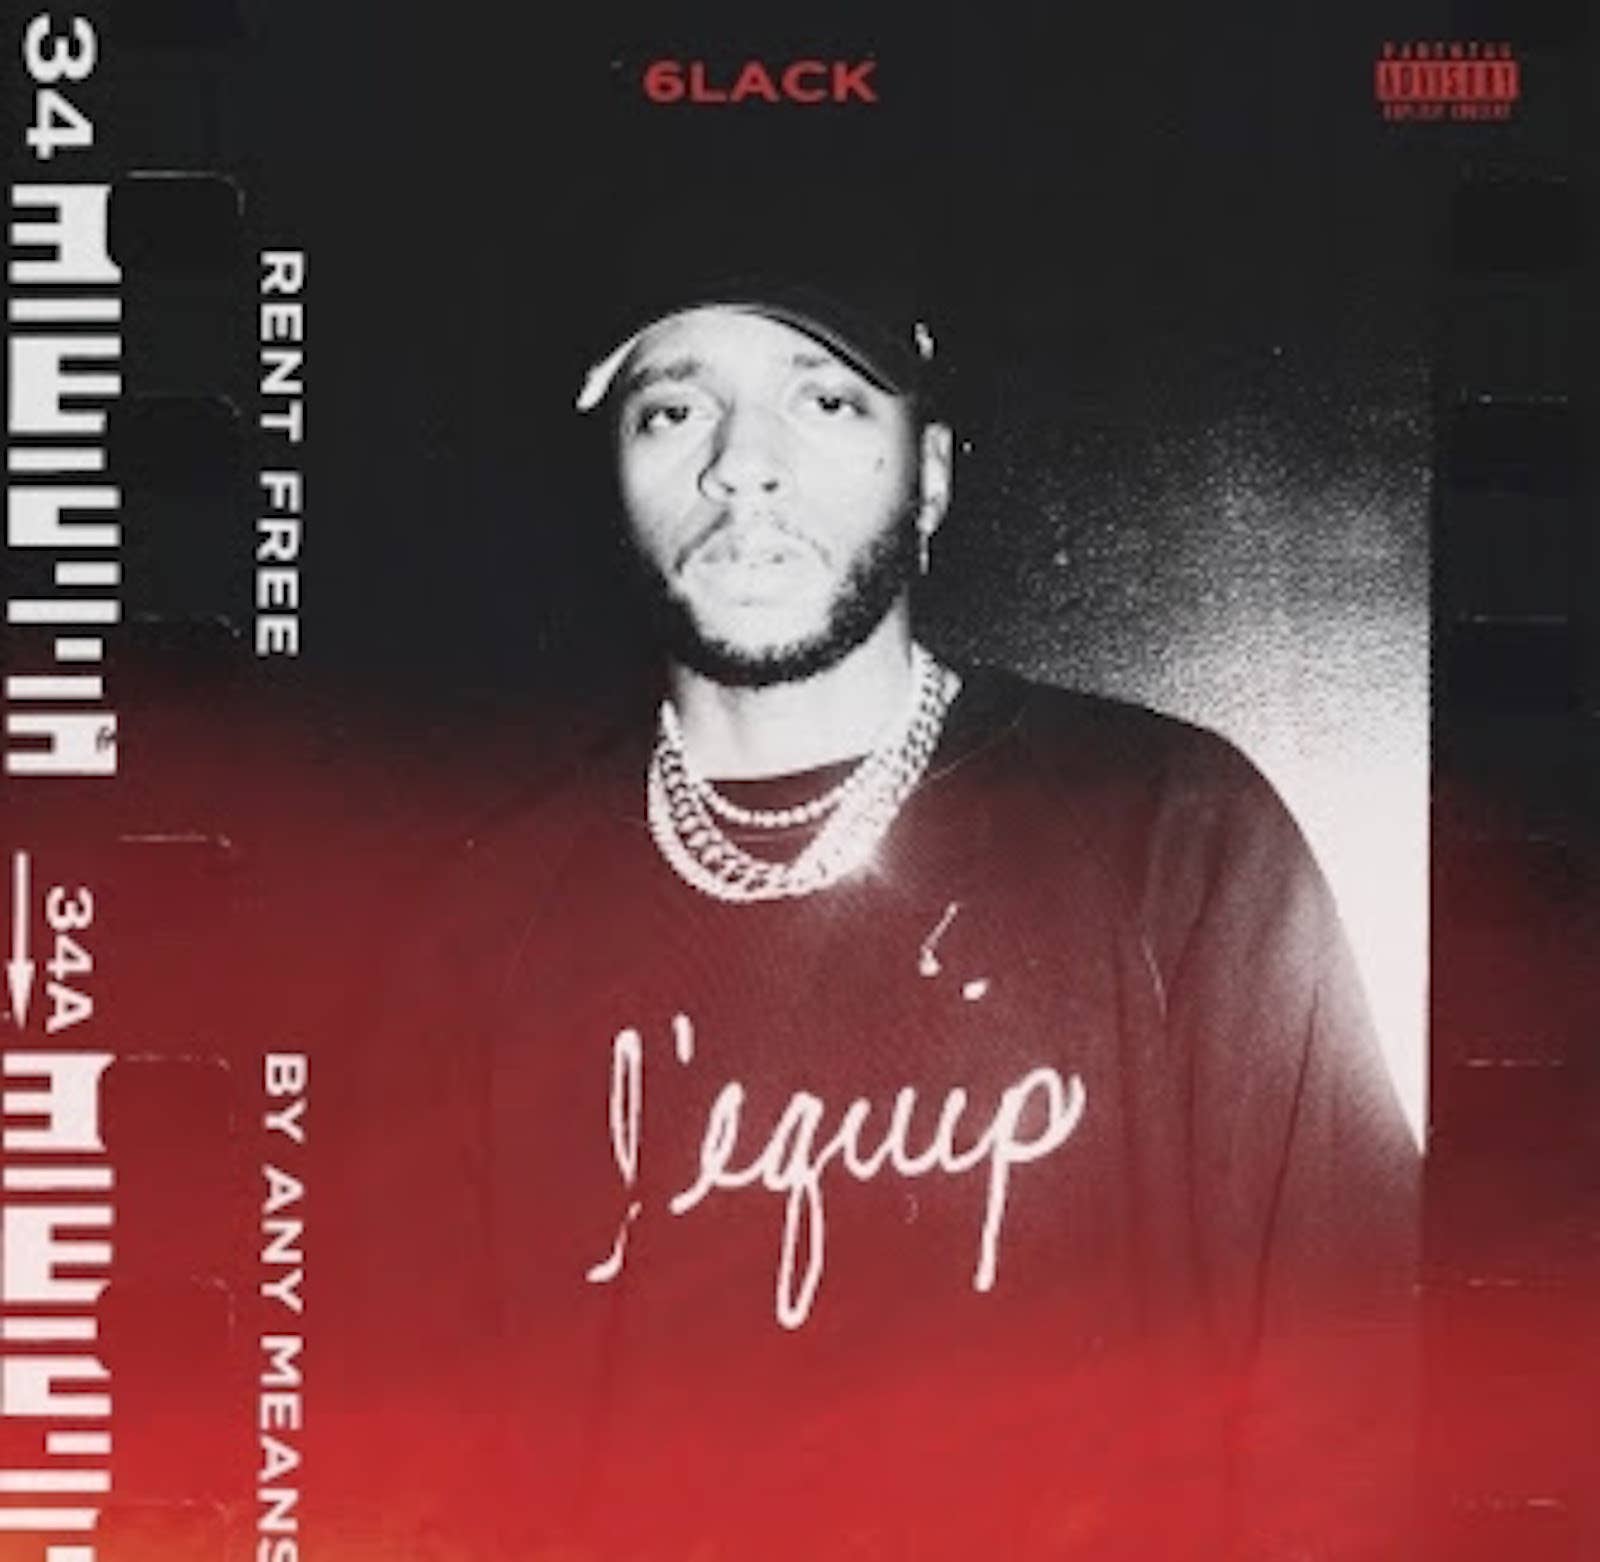 6lack drops two new songs "Rent Free" and "By Any Means"